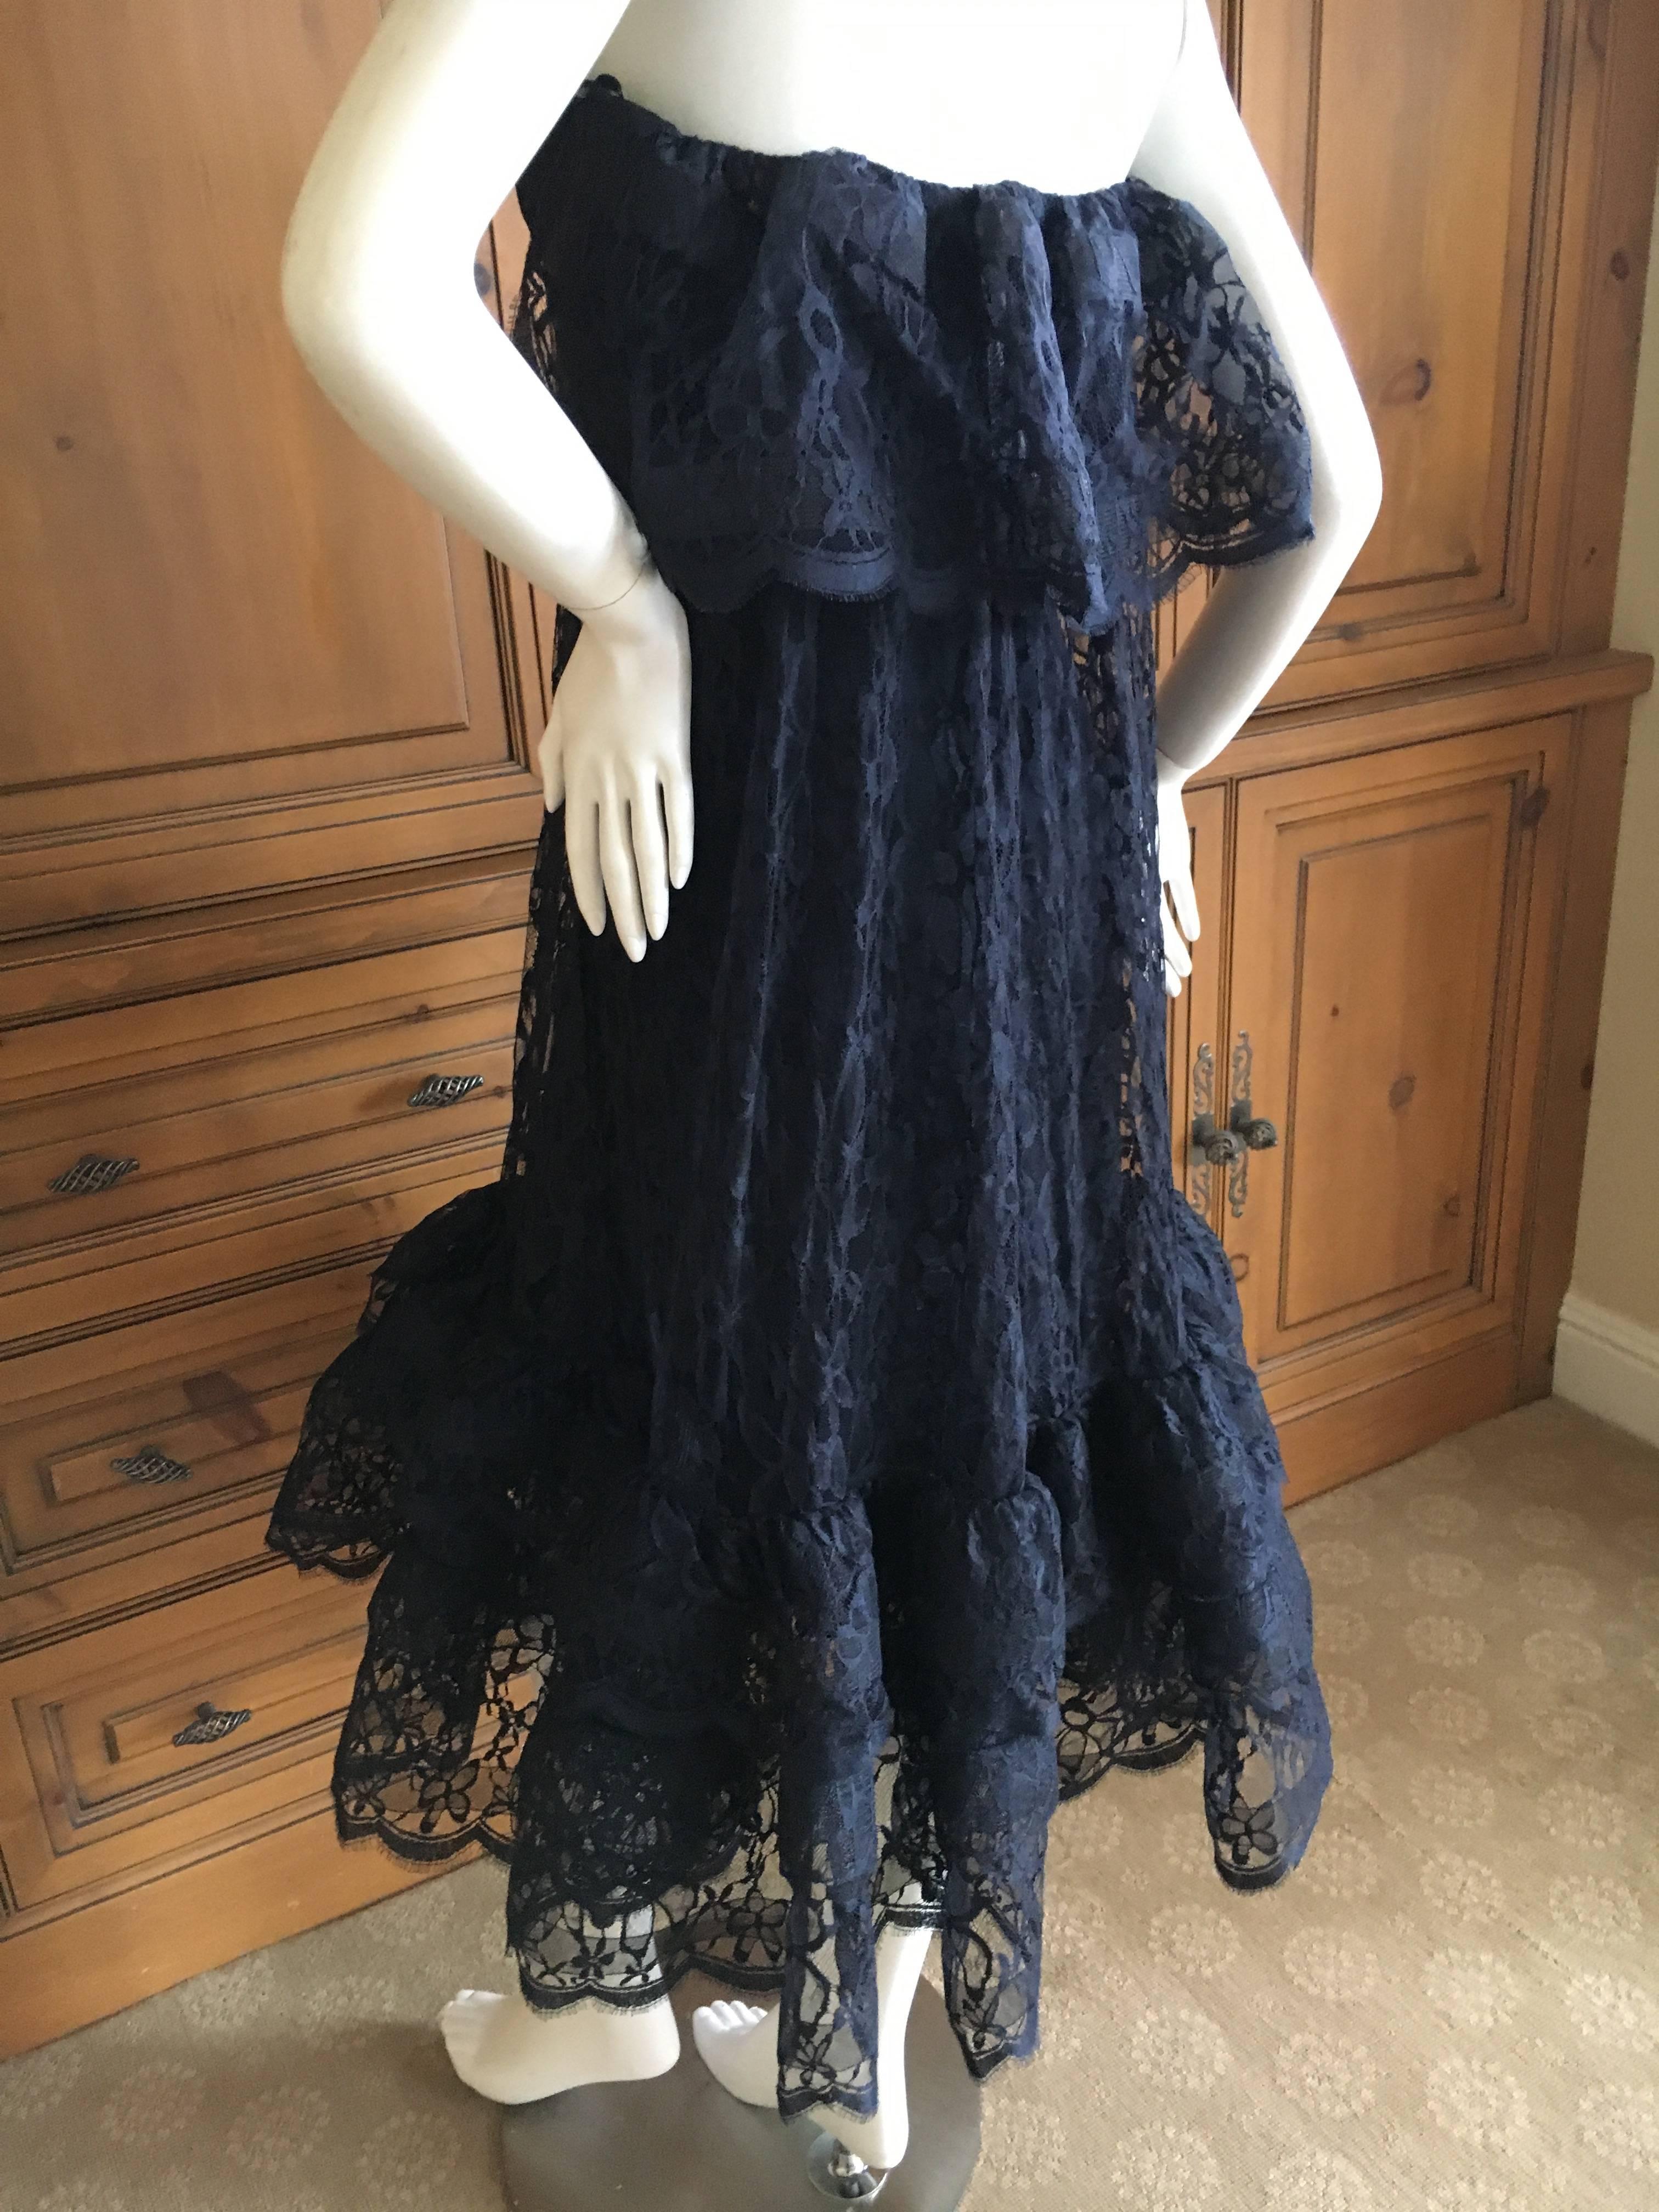 Balenciaga Edition Navy Blue Lace Evening Dress New $7295 Barneys Tags In New Condition For Sale In Cloverdale, CA